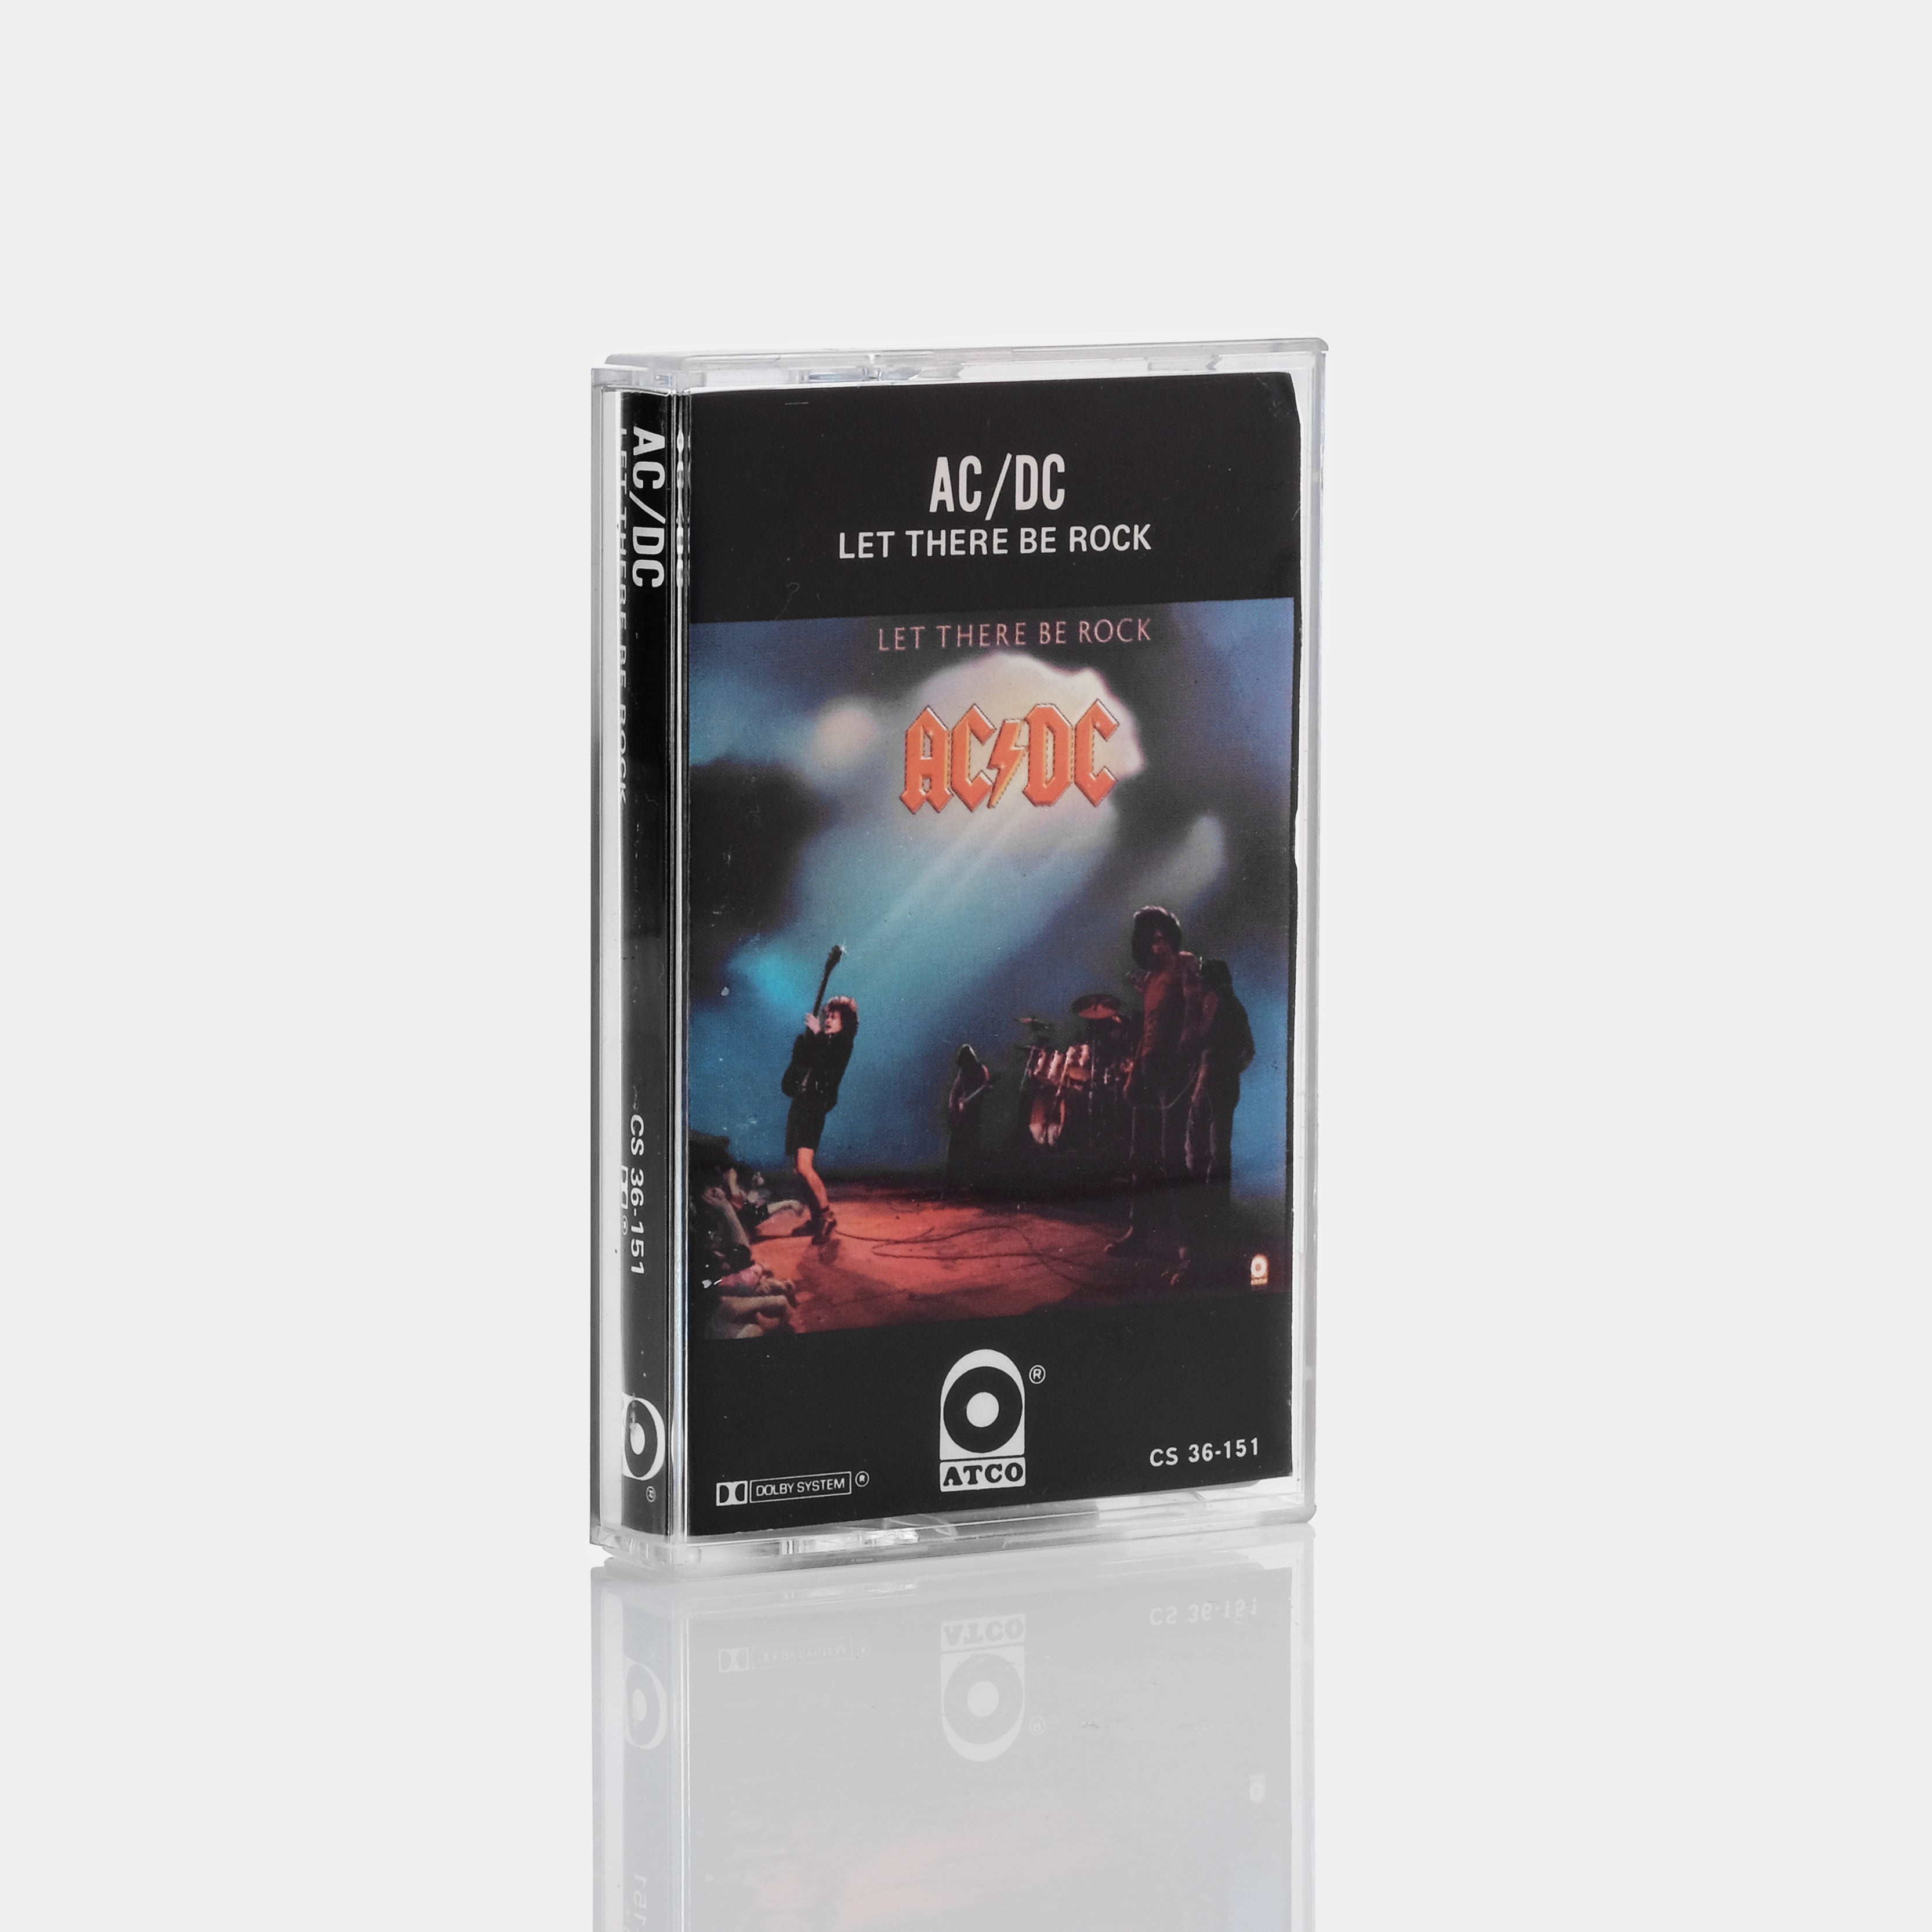 AC/DC - Let There Be Rock Cassette Tape